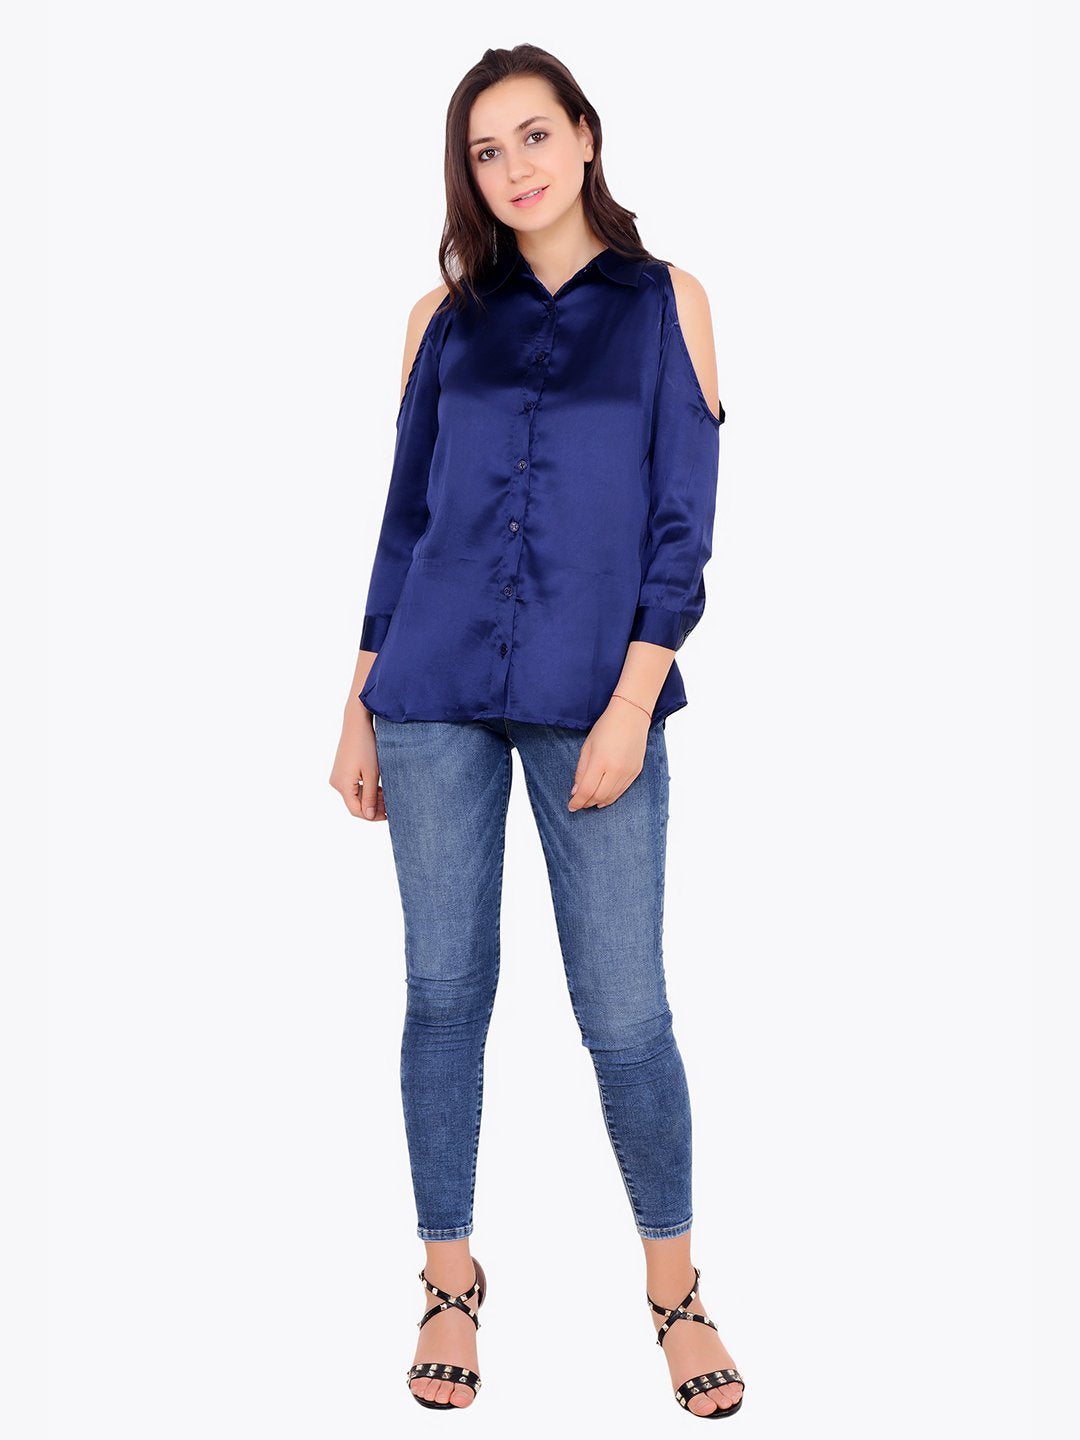 Cation Solid Blue Satin Shirt